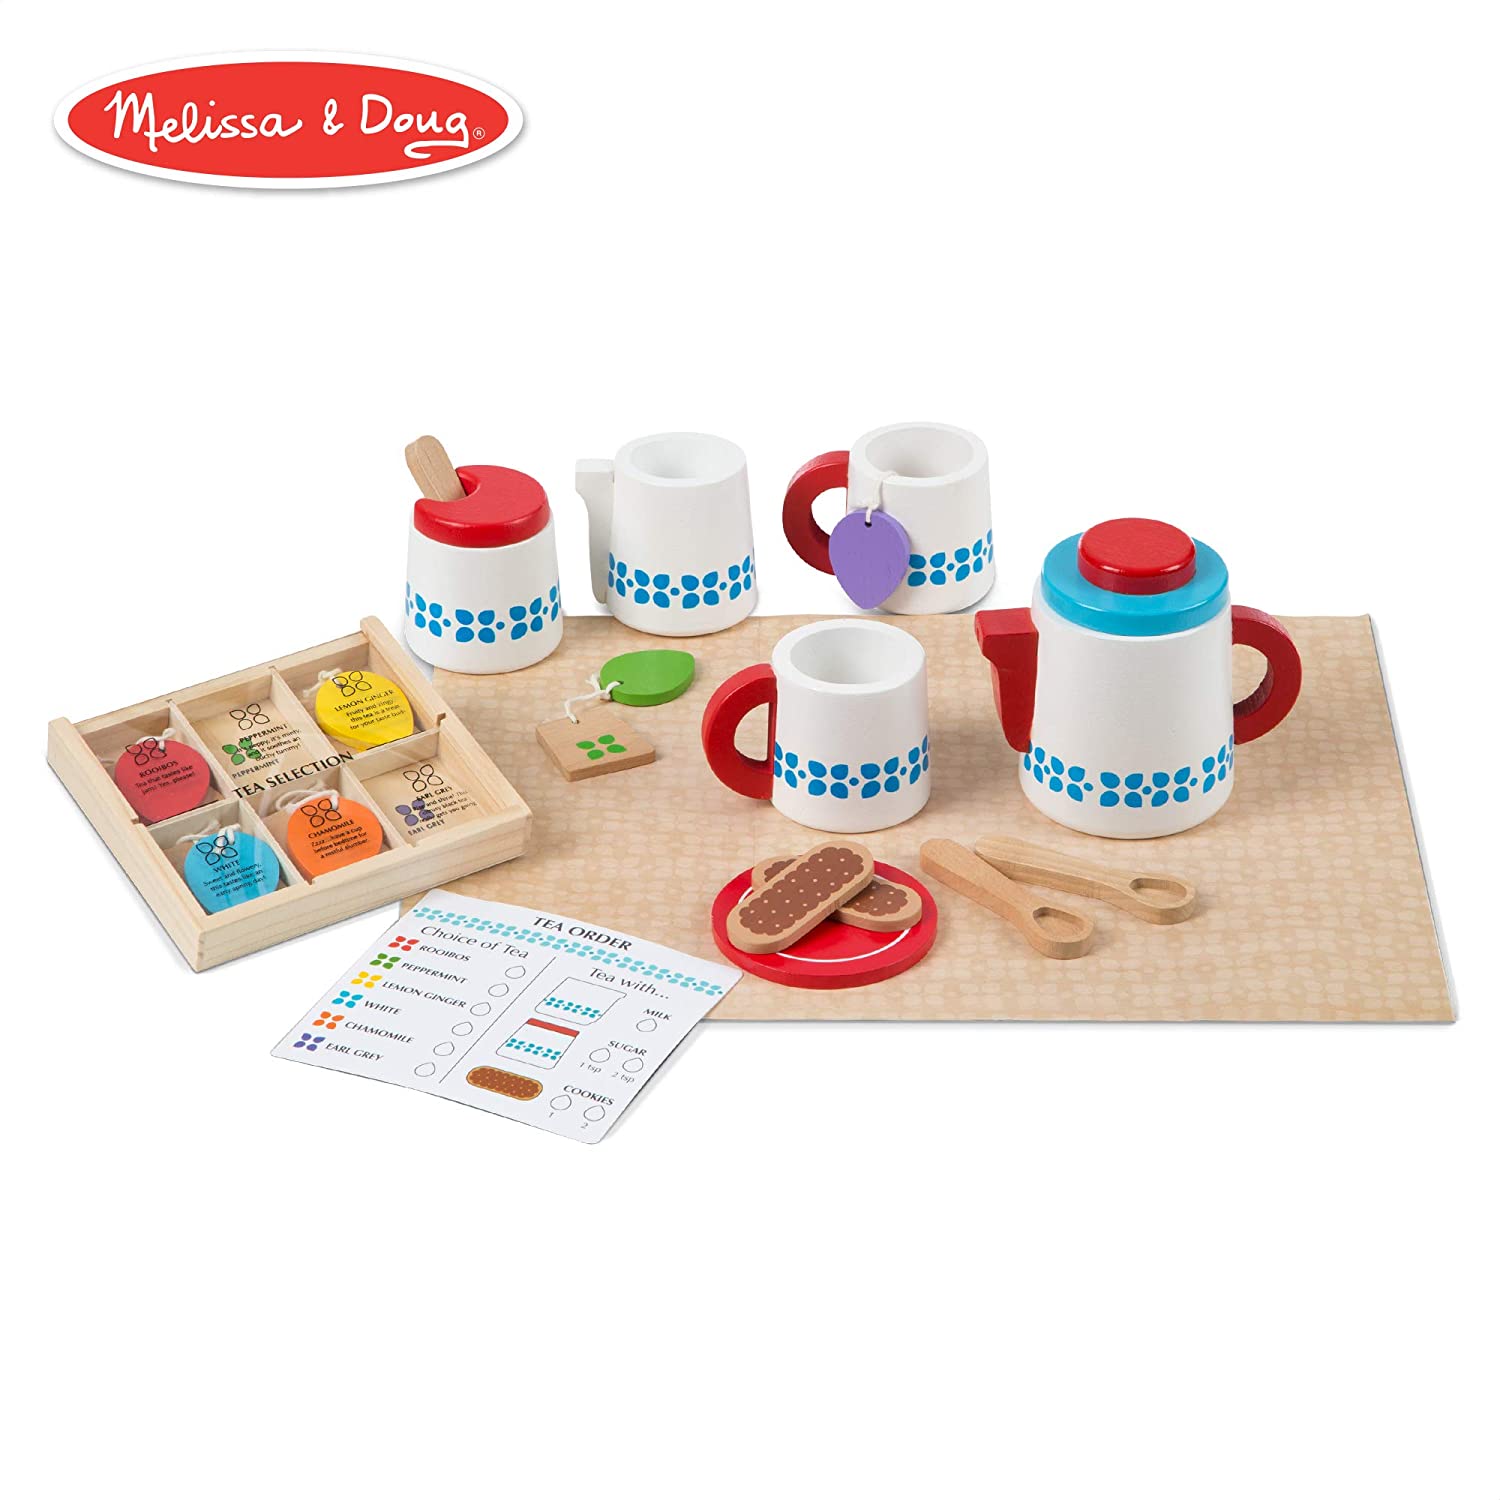 9 Best Kids Tea Sets 2022 - Buying Guide & Reviews 8